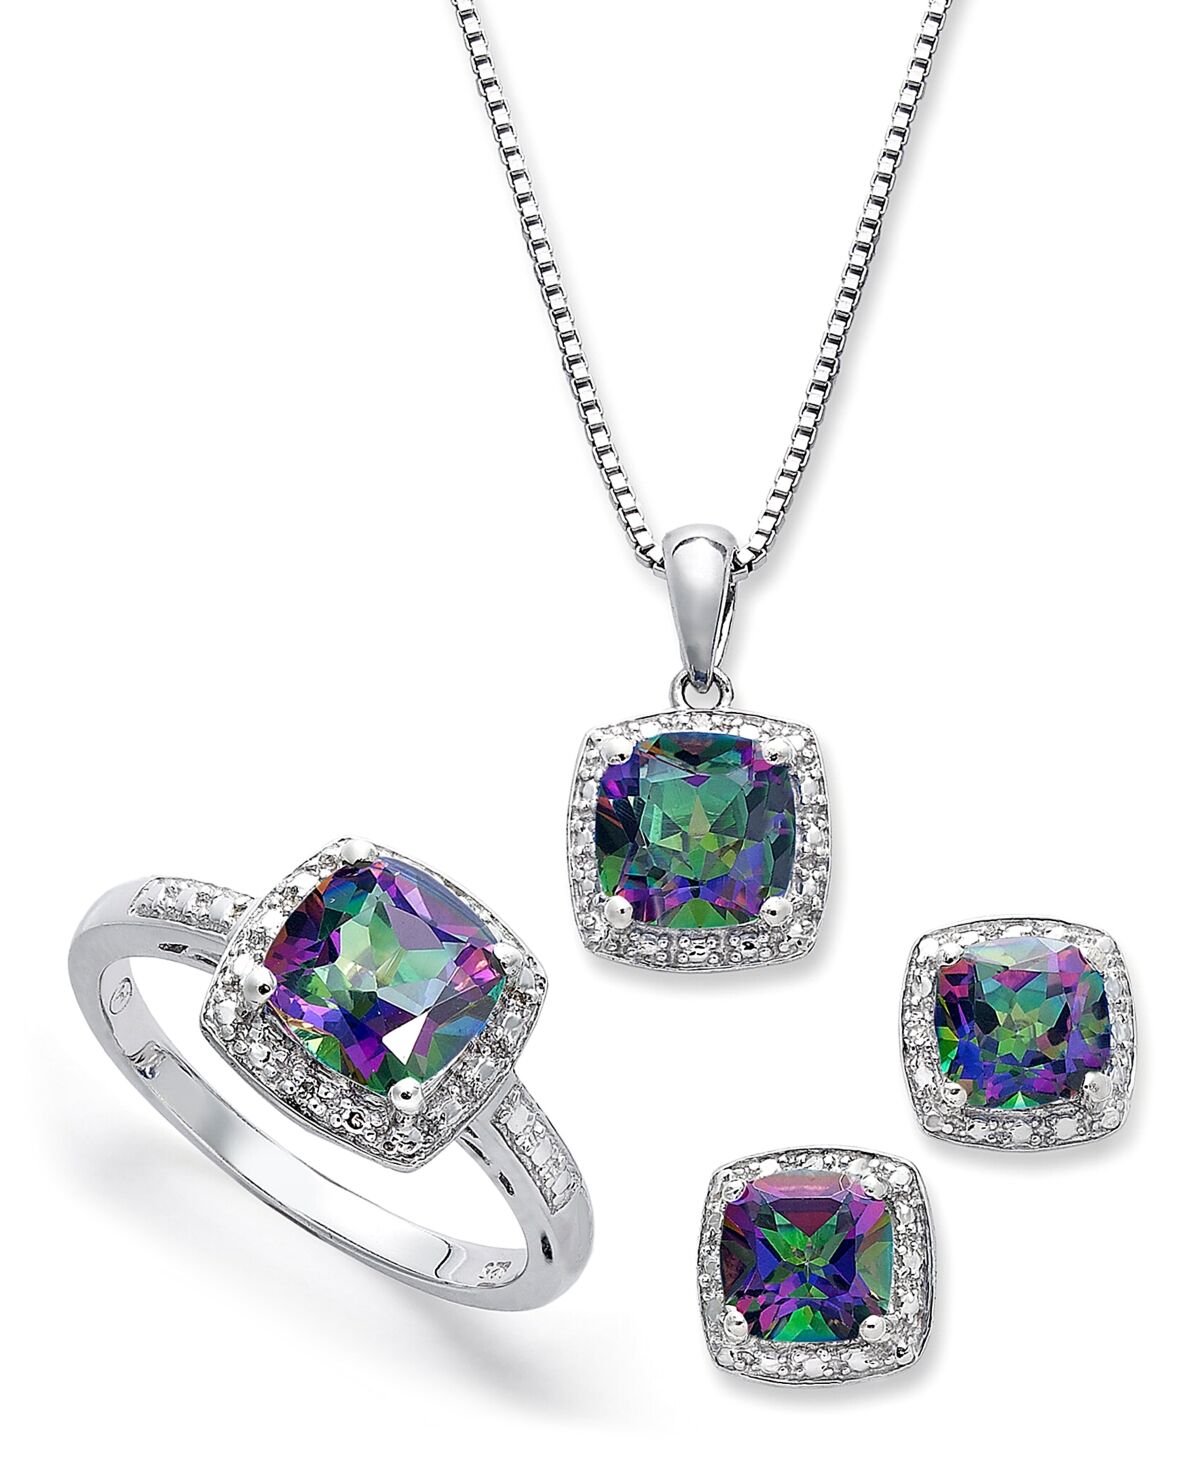 Macy's Sterling Silver Jewelry Set, Mystic Topaz (4-3/4 ct. t.w.) and Diamond Accent Necklace, Earrings and Ring Set - Mystic Topaz